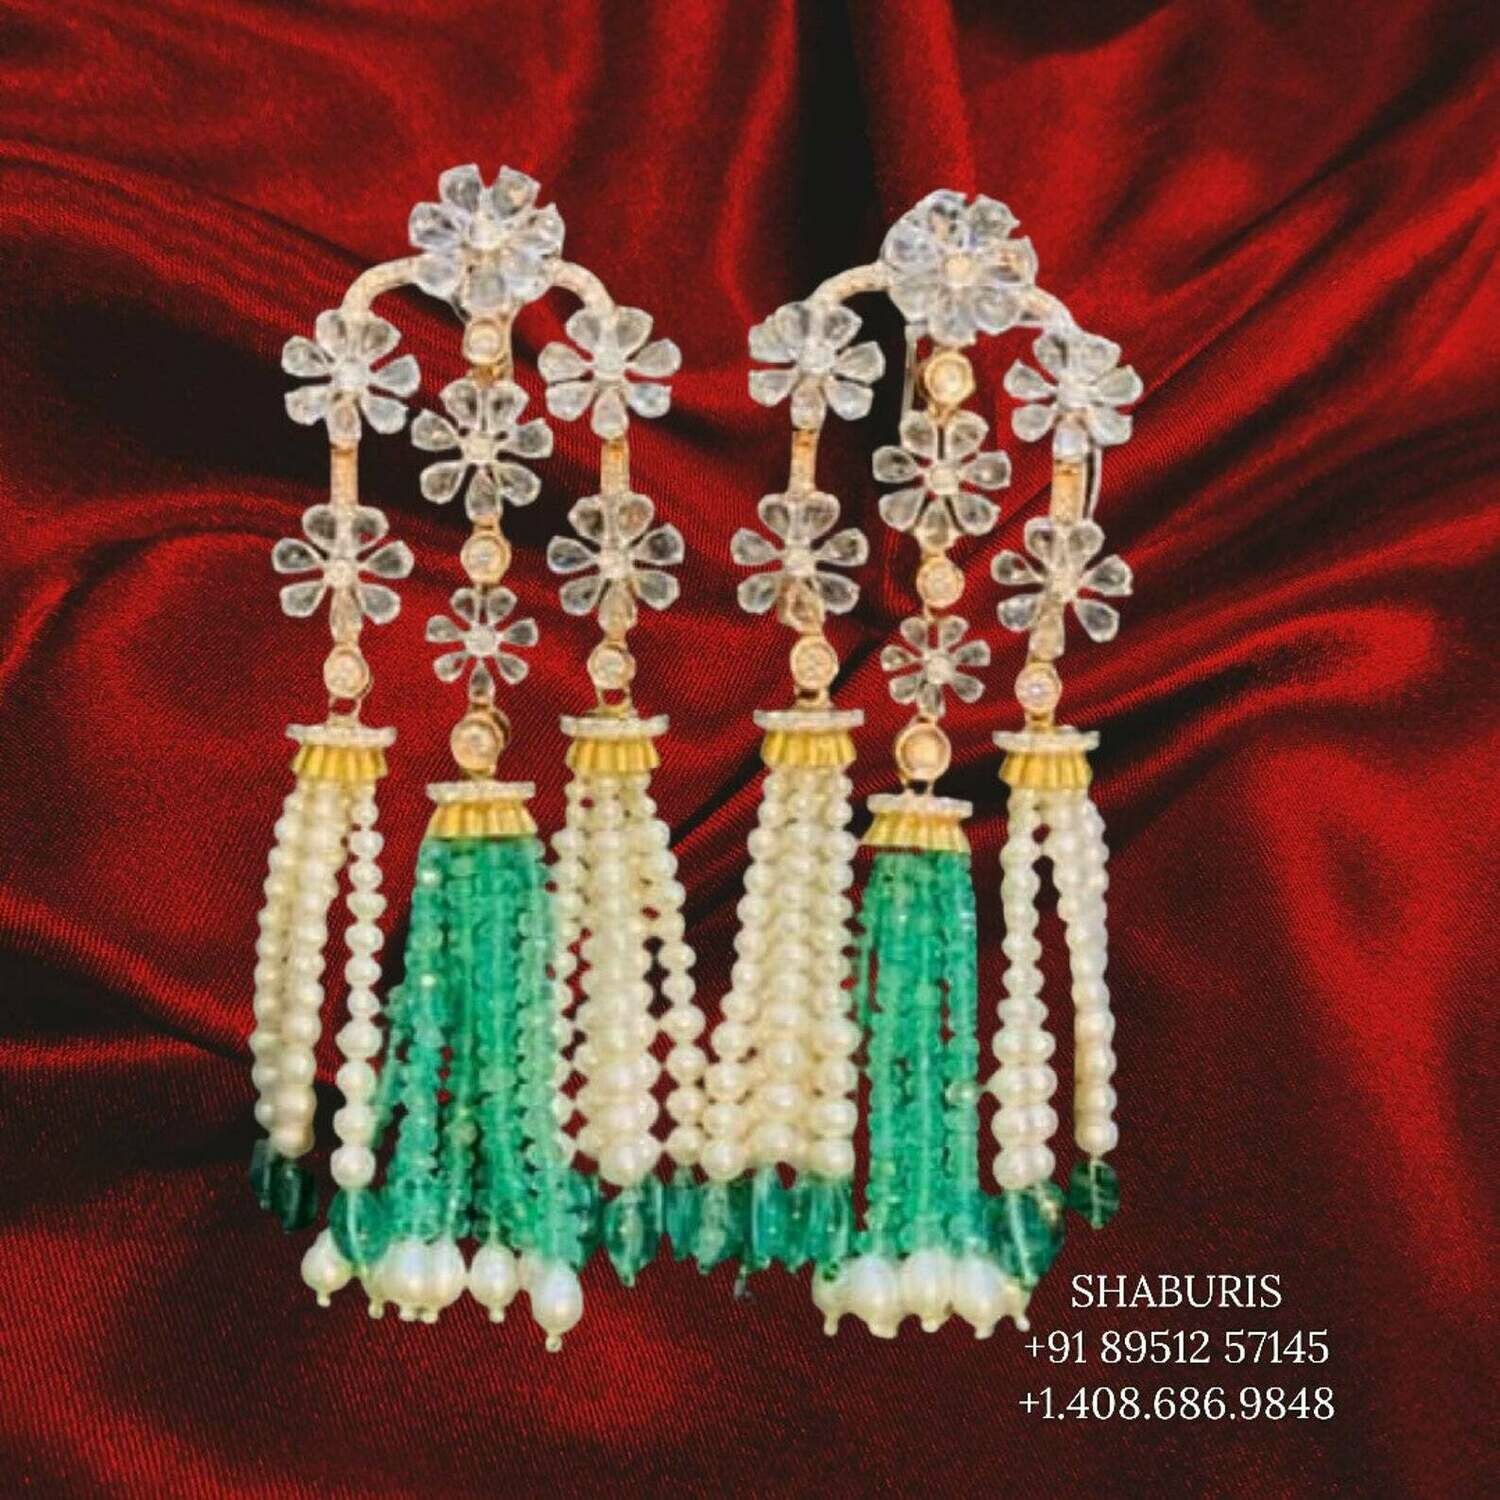 Indian Jewelry,Pure Silver Jewellery Indian,Mossanite earrings,tassel Jewelry,cocktail earrings beaded jewelry indian gold jewelry -SHABURIS